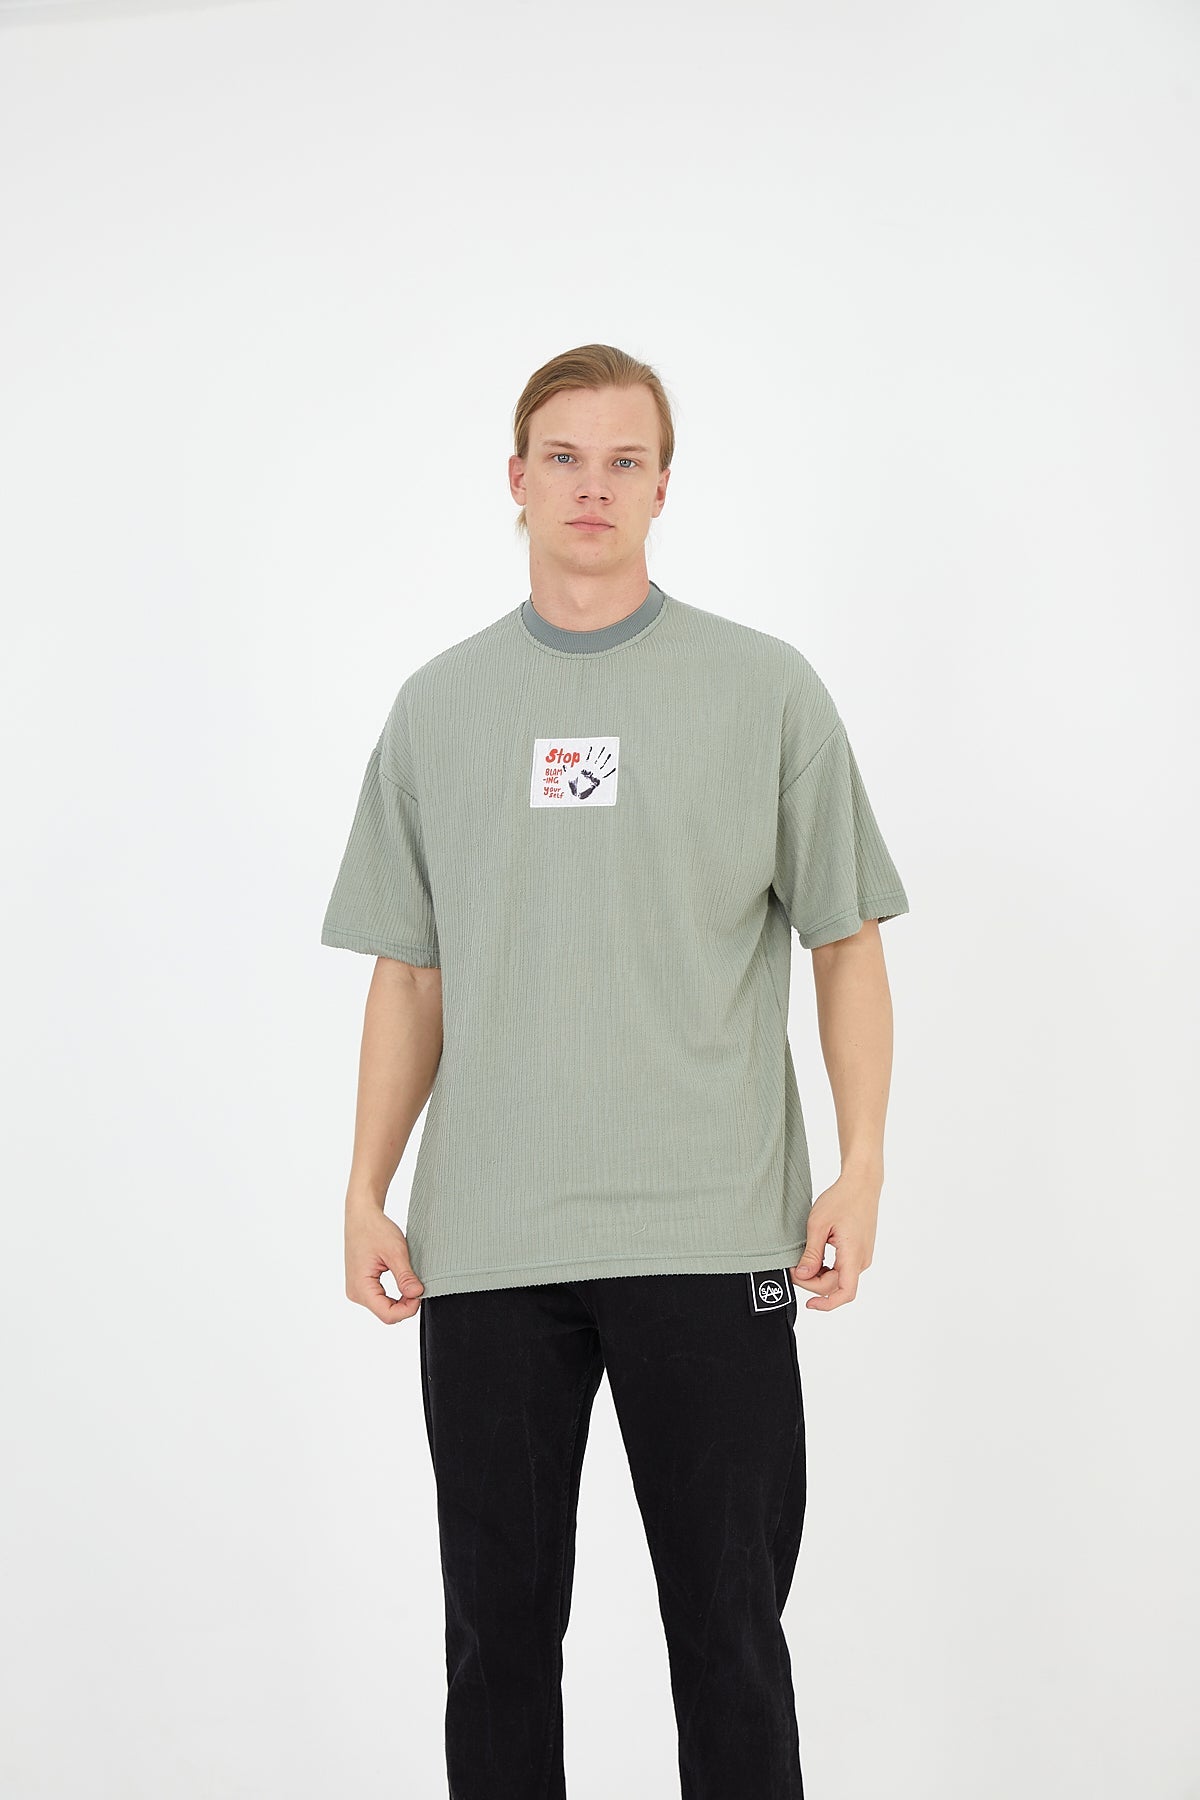 T-SHIRT - STOP STOPPING YOURSELF - GREEN - DYS-Amsterdam